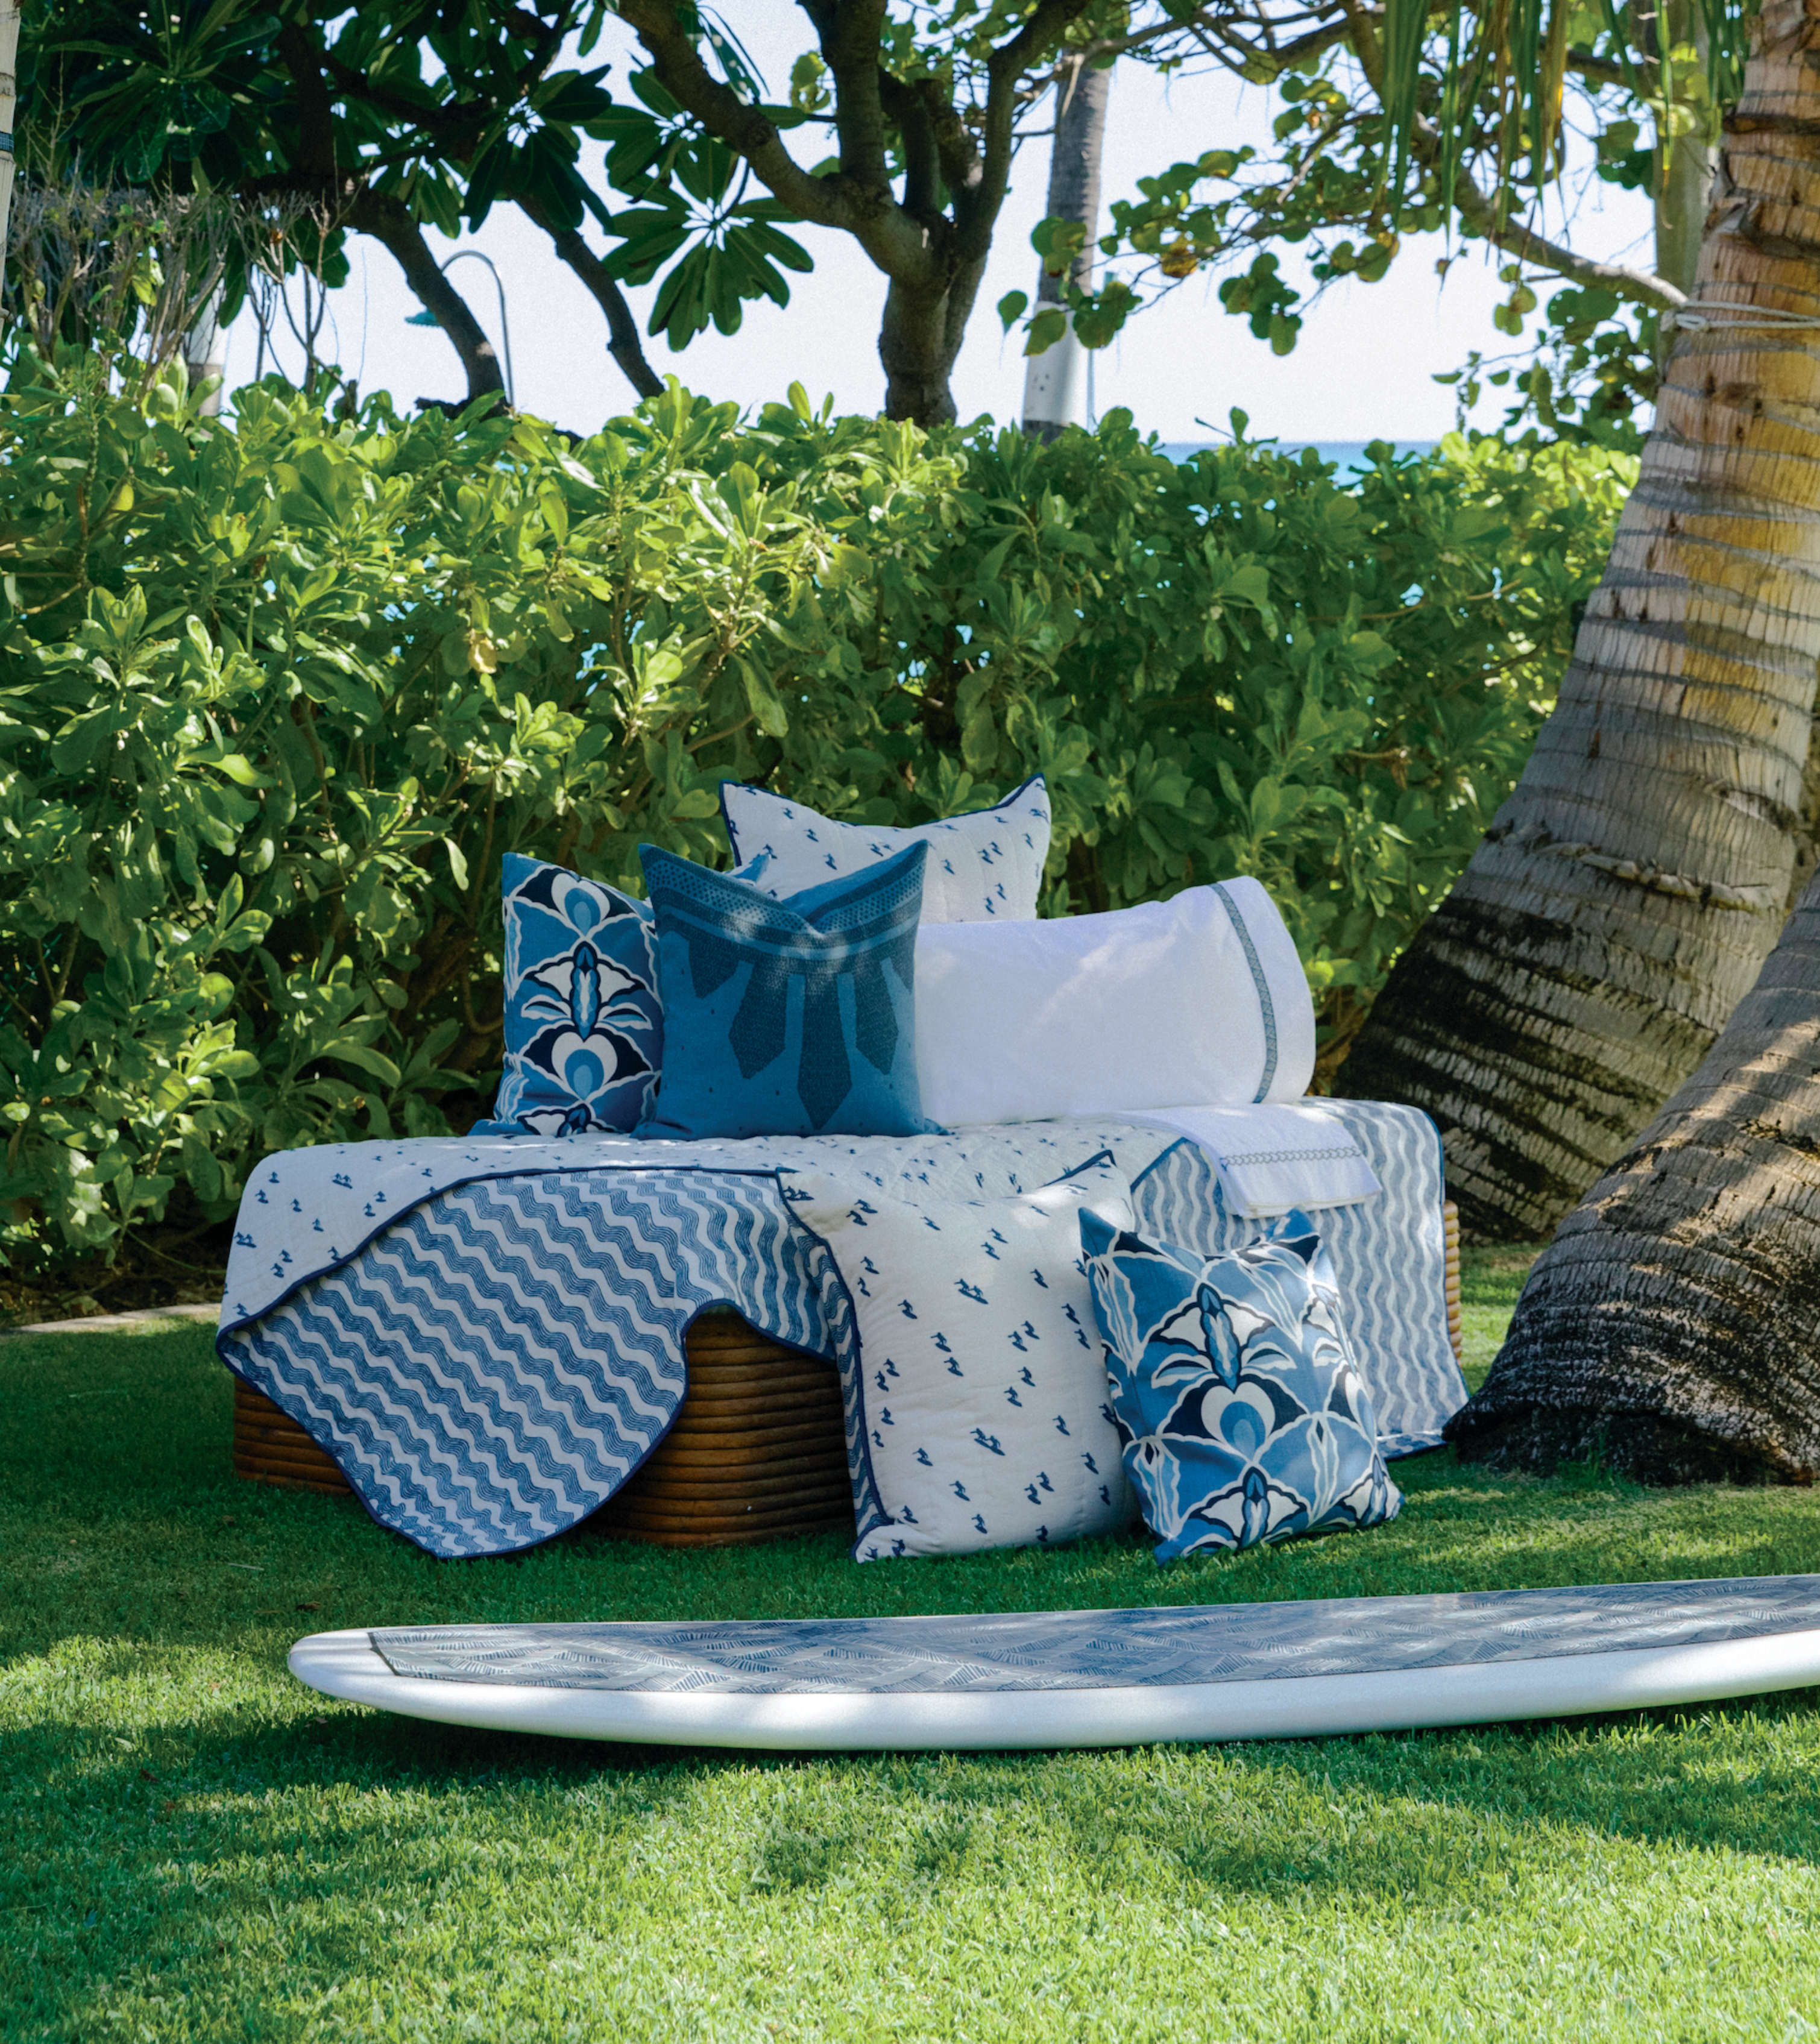 Andrew Mau x Averylily Surfer Blockprint Quilt and Euro Shams in Ocean Blue, styled with Serena Dugan Studio pillows.